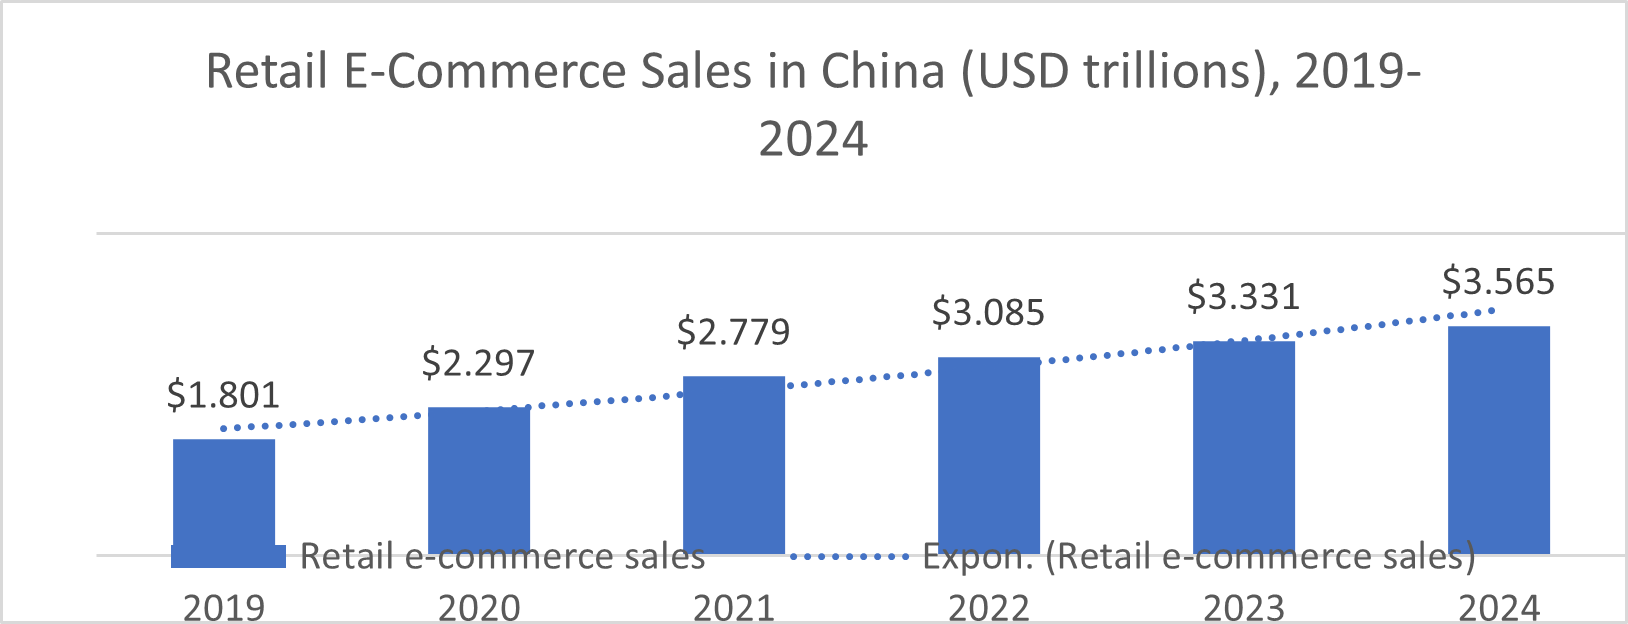 retail eCommerce sales in China